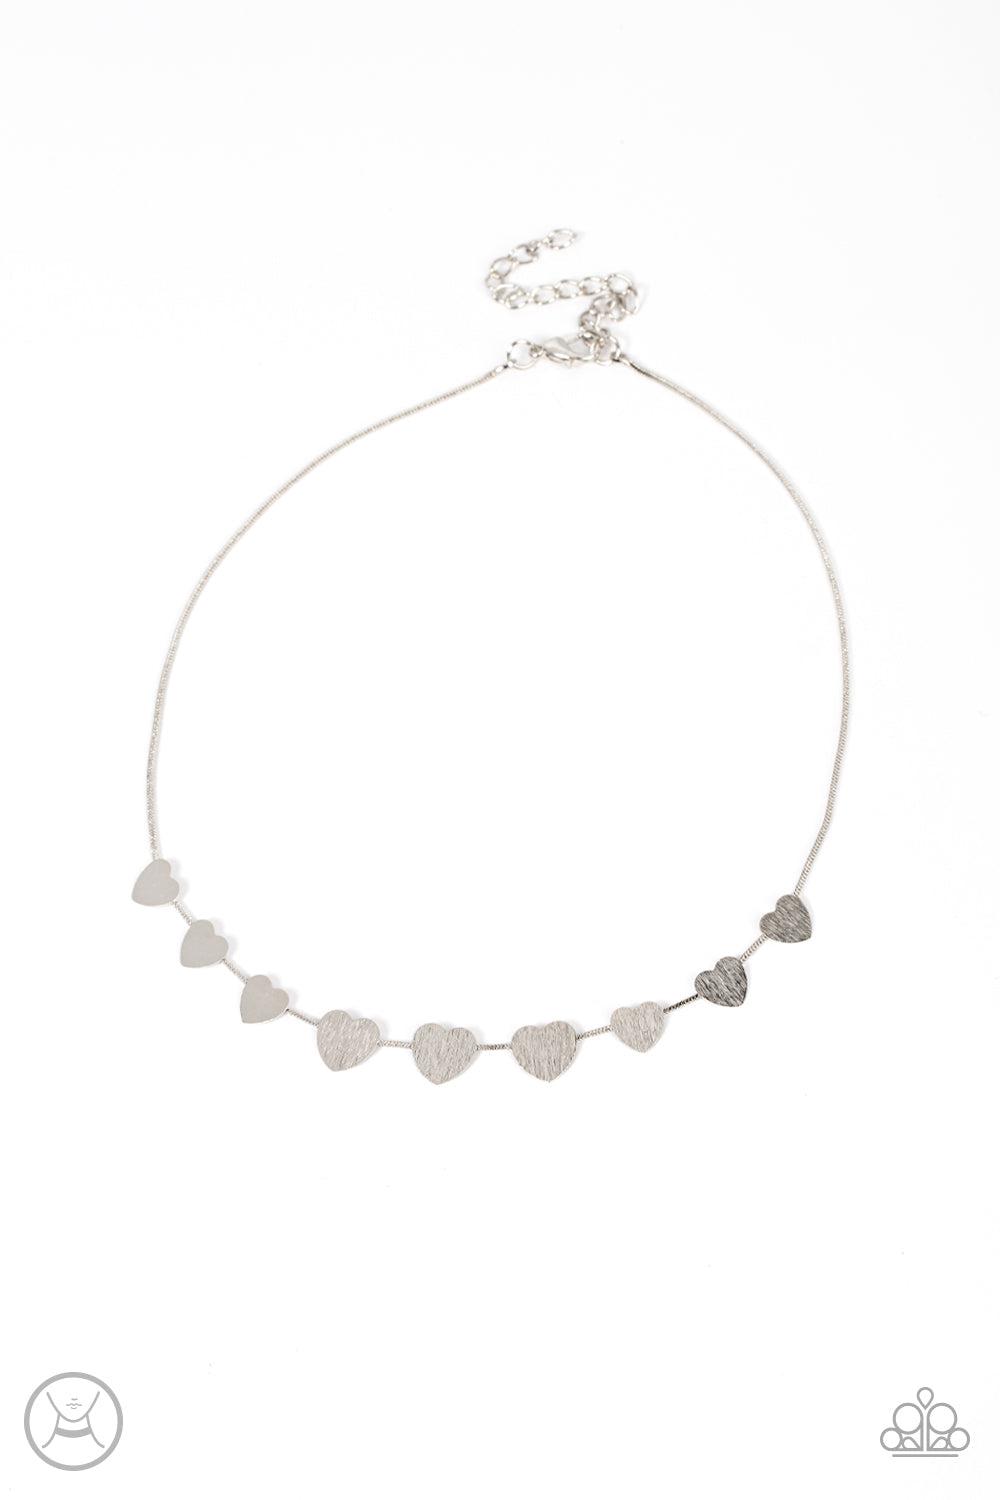 Dainty Desire Silver Heart Choker Necklace - Paparazzi Accessories- lightbox - CarasShop.com - $5 Jewelry by Cara Jewels